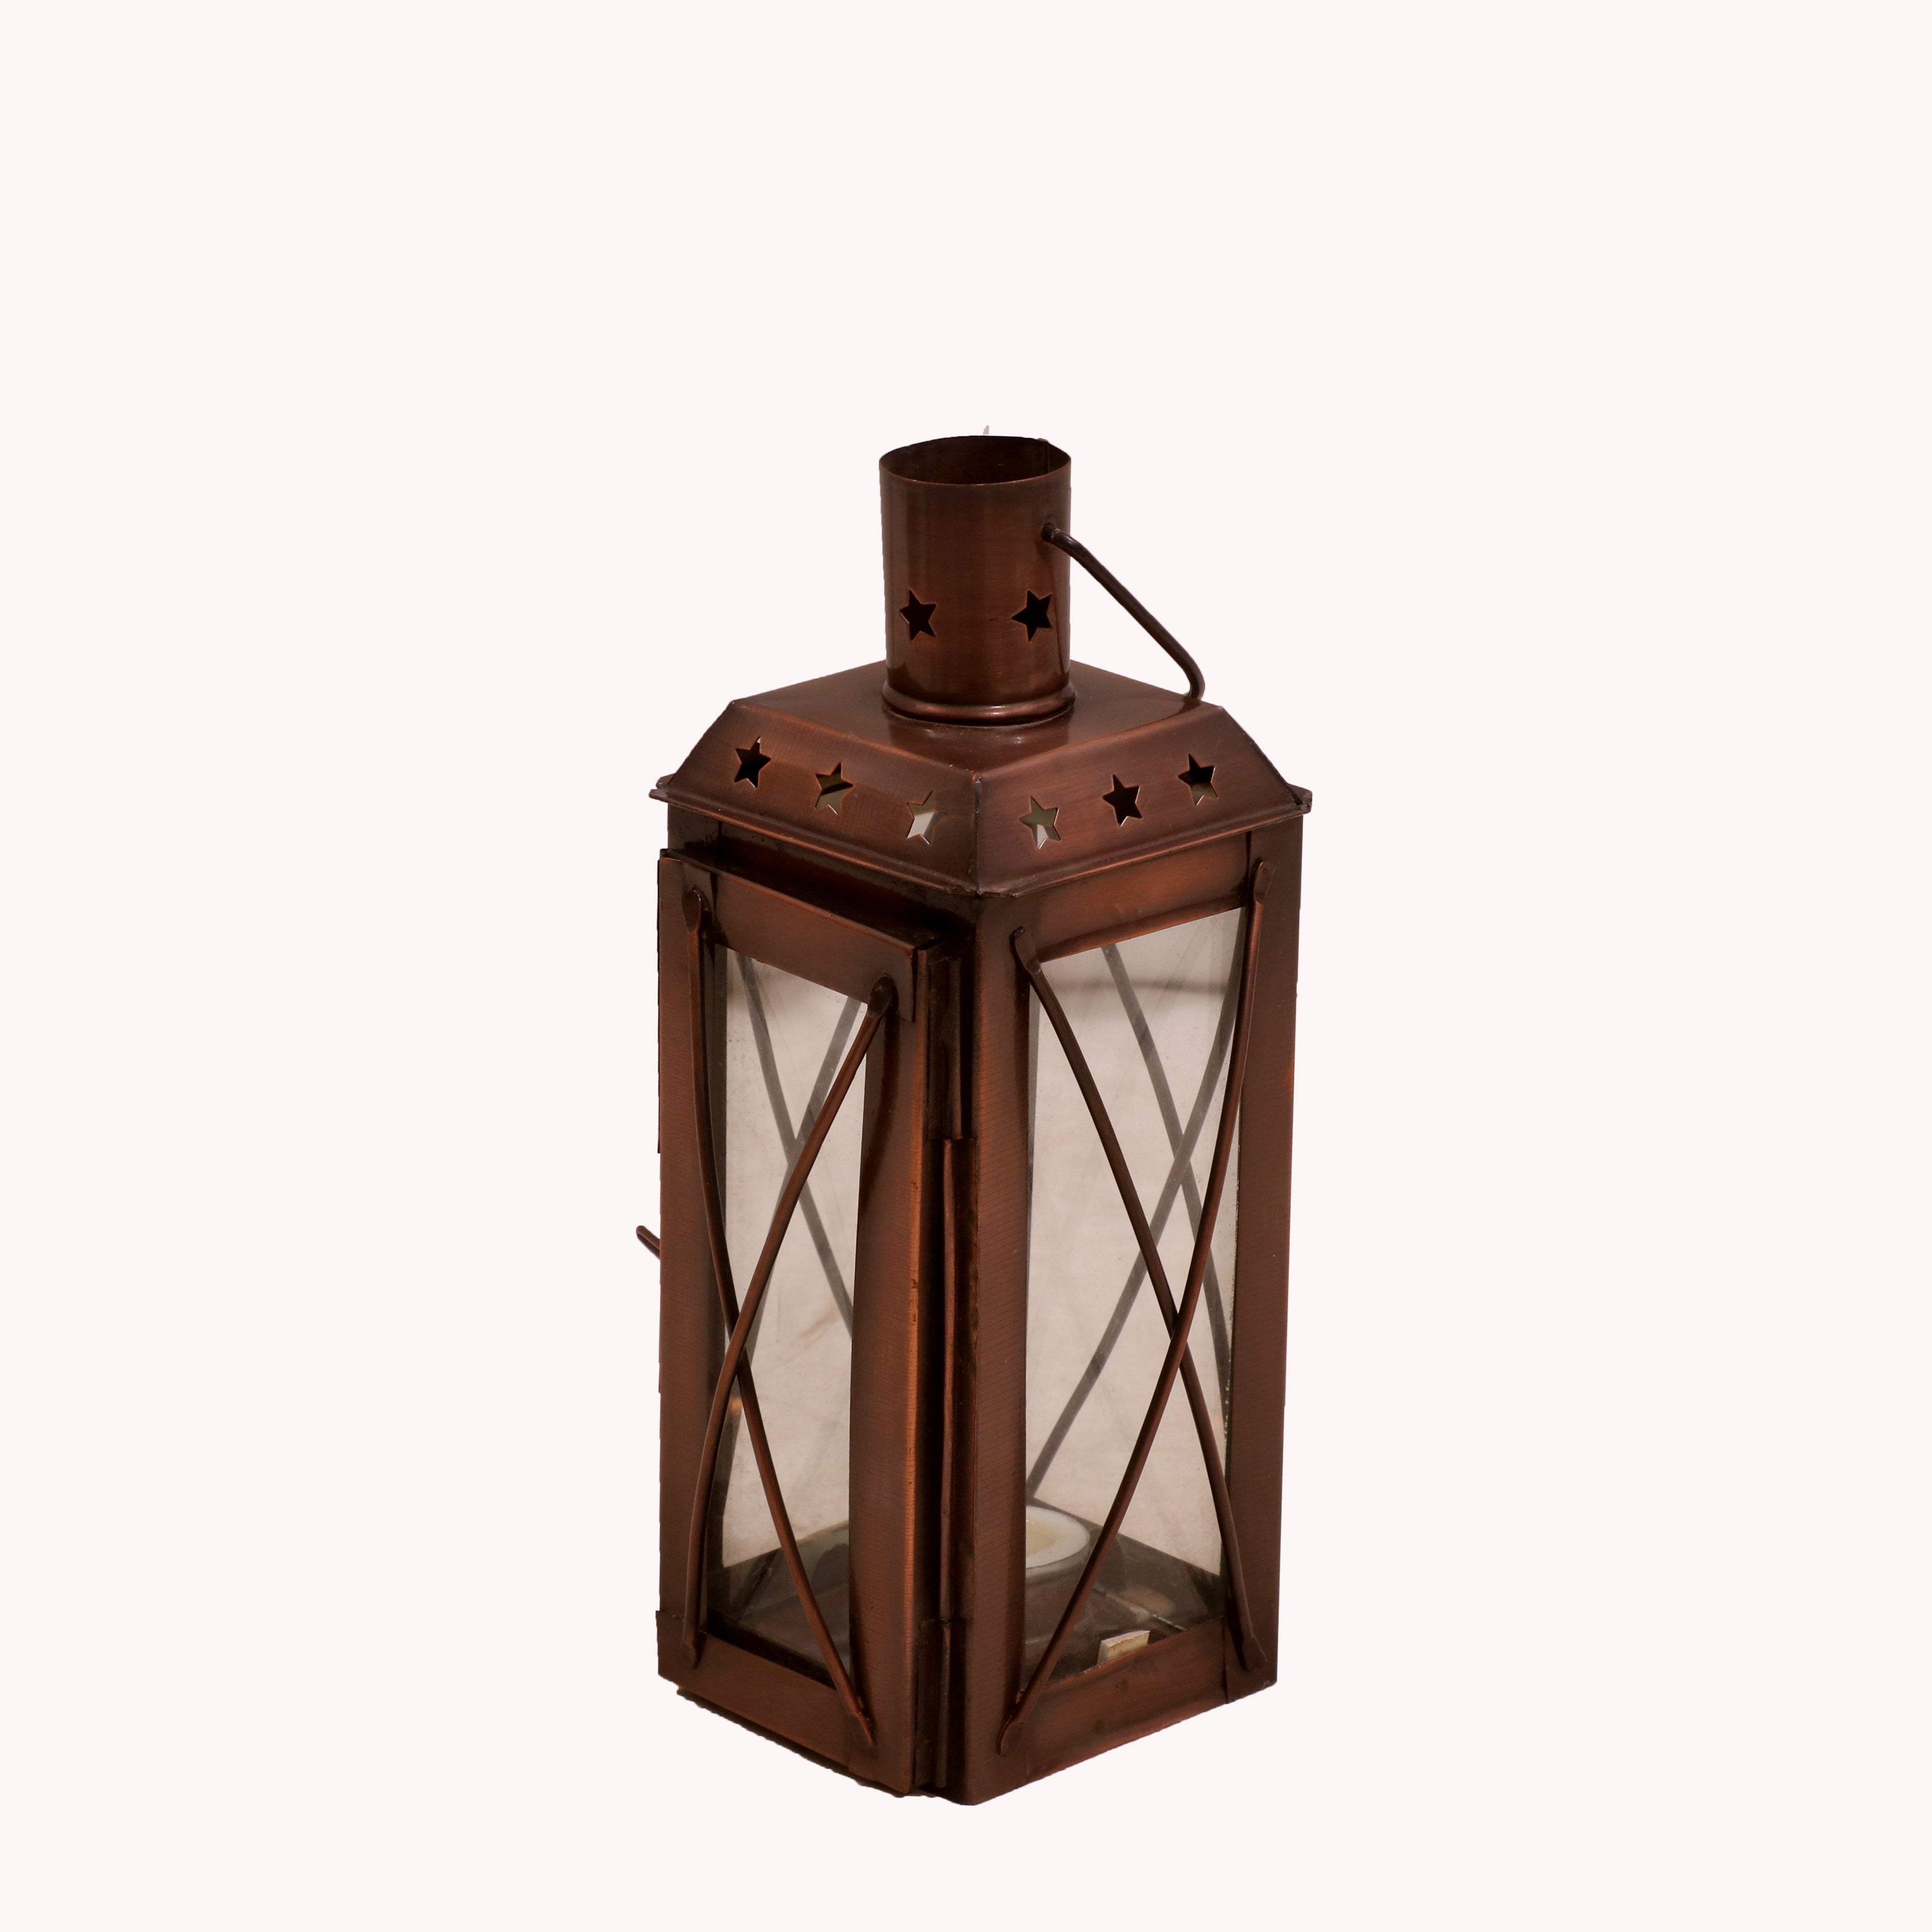 Rustic Copper Hued Lamp 3 x 3 x 9 Inch Candle Holder